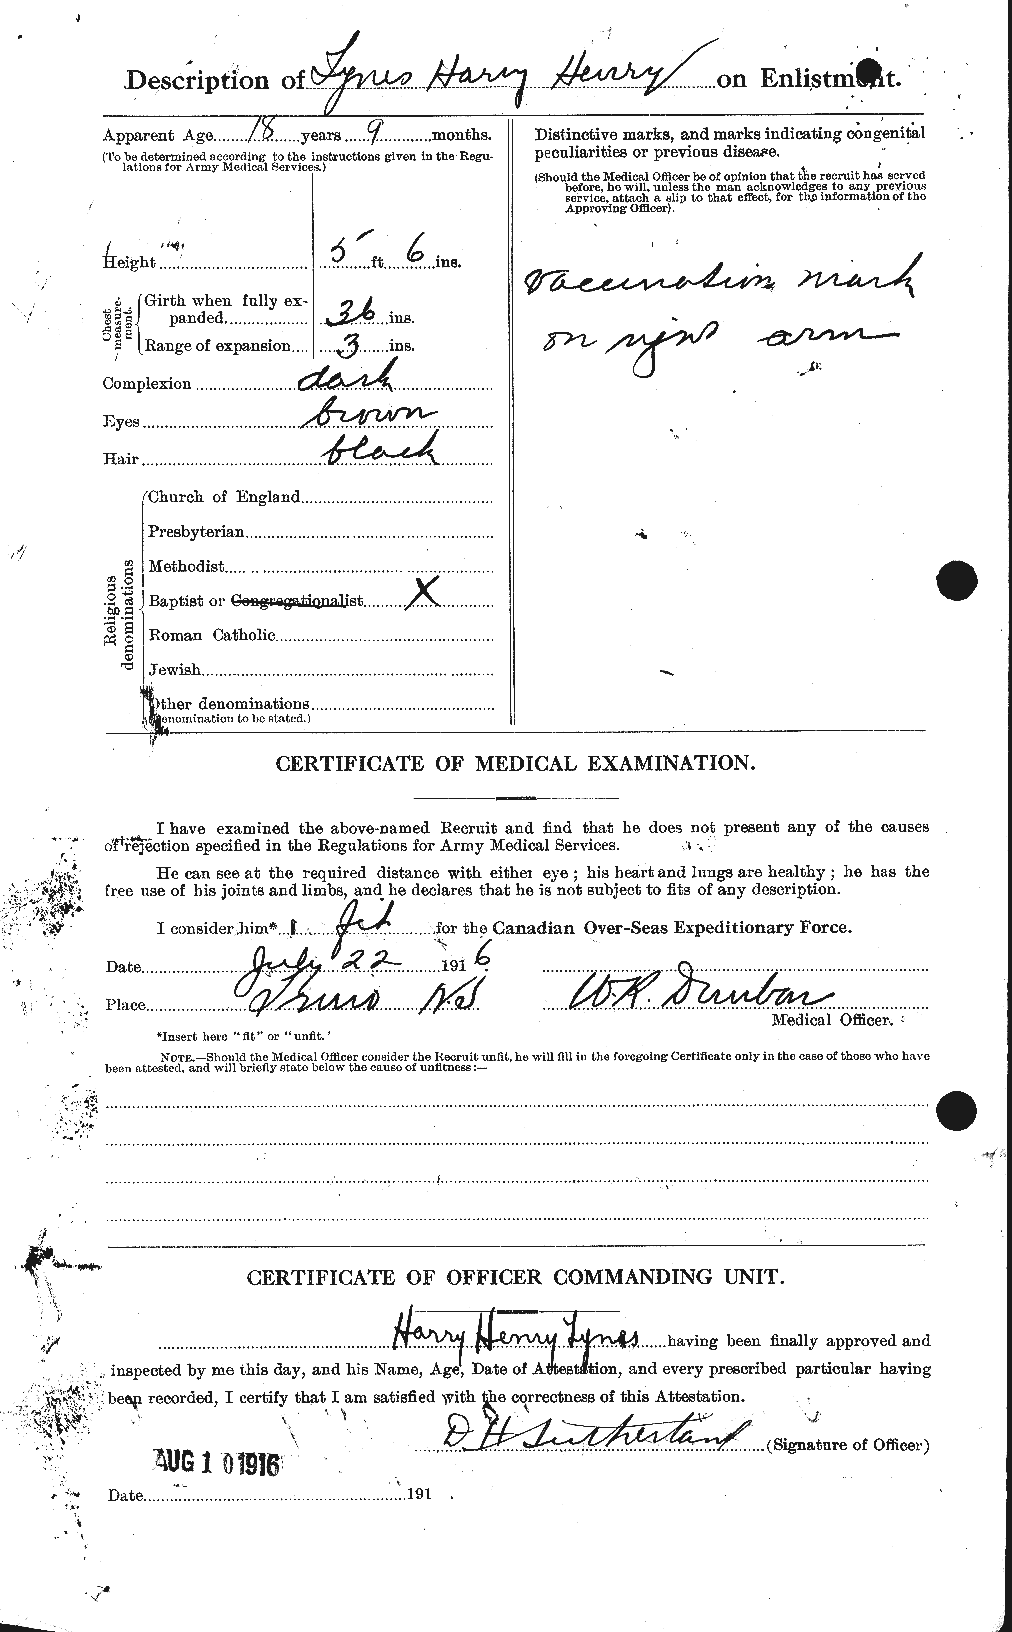 Personnel Records of the First World War - CEF 644539b